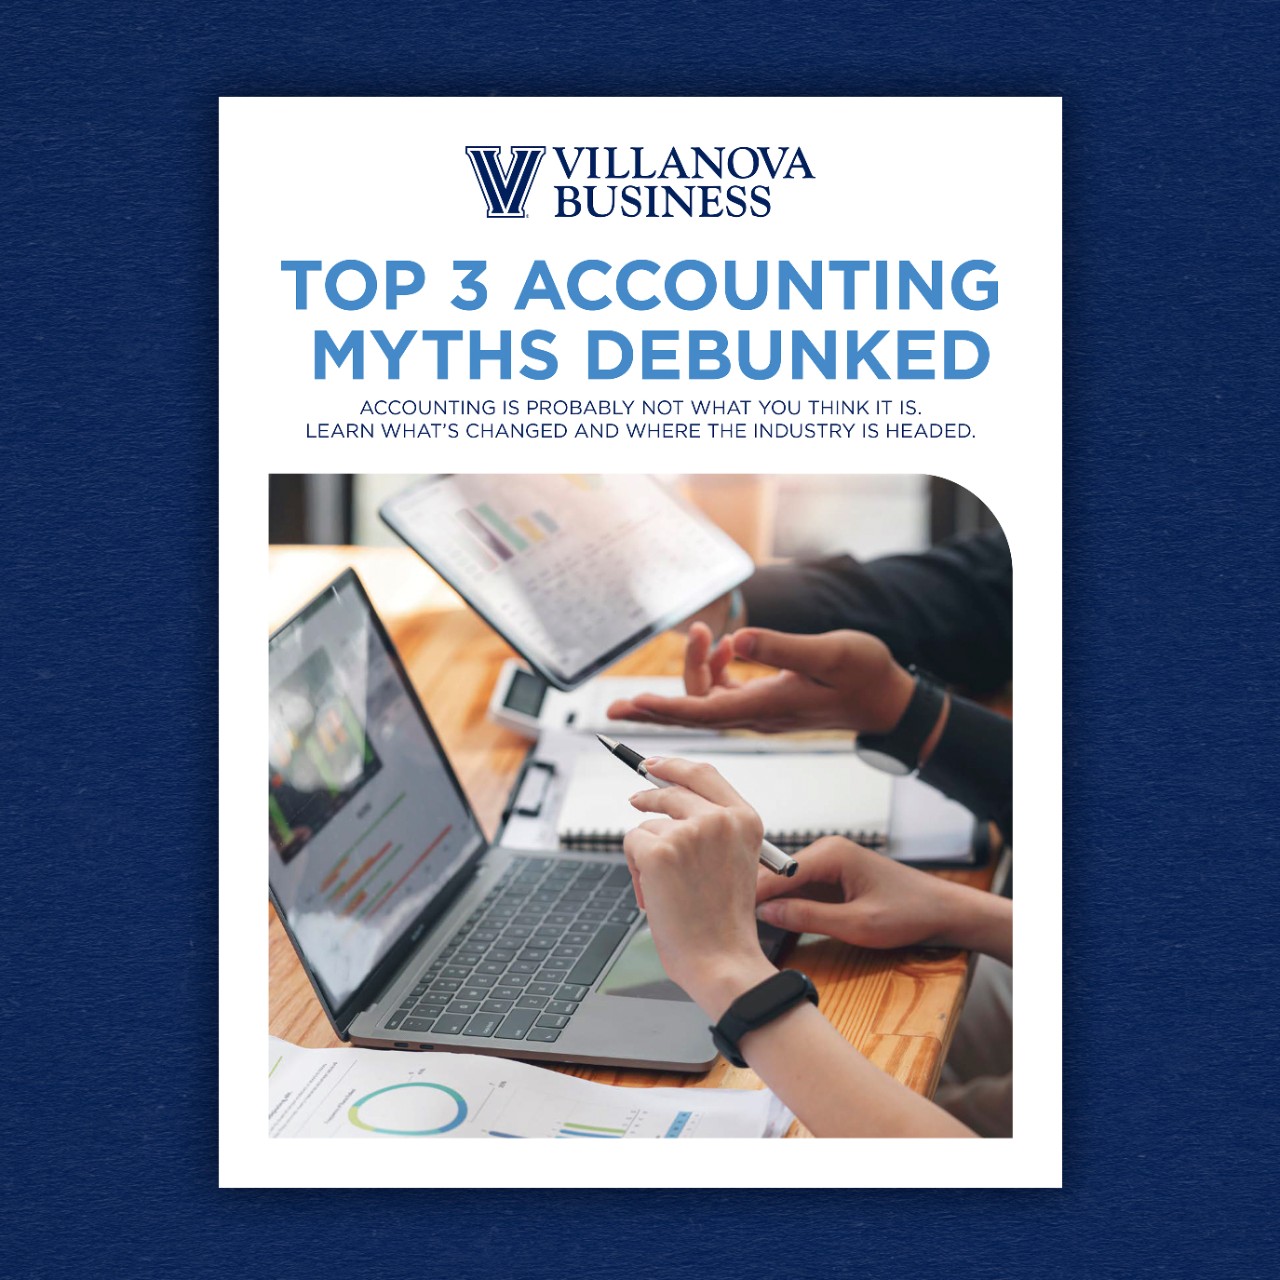 Top 3 Accounting Myths Debunked: Learn What’s Changed and Where the Industry is Headed